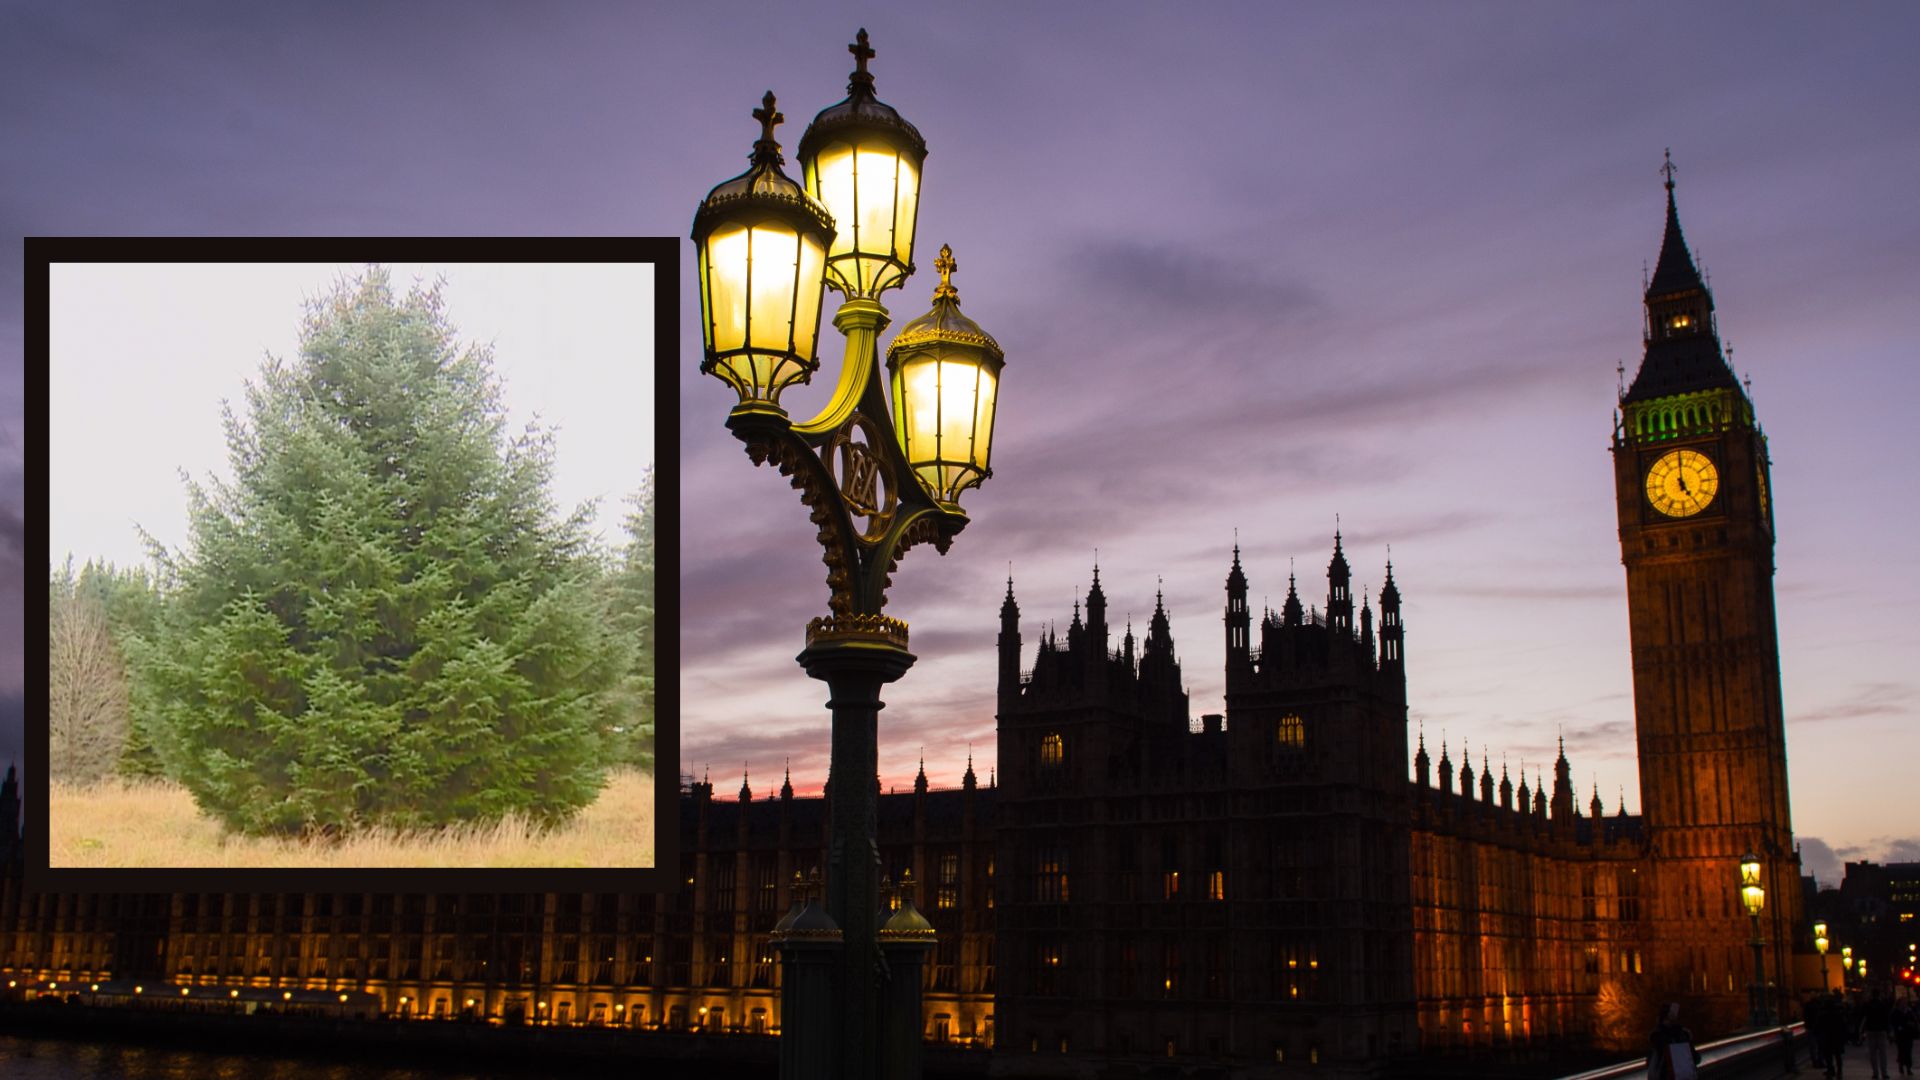 From Northumberland to Westminster The tree lighting up Big Ben this